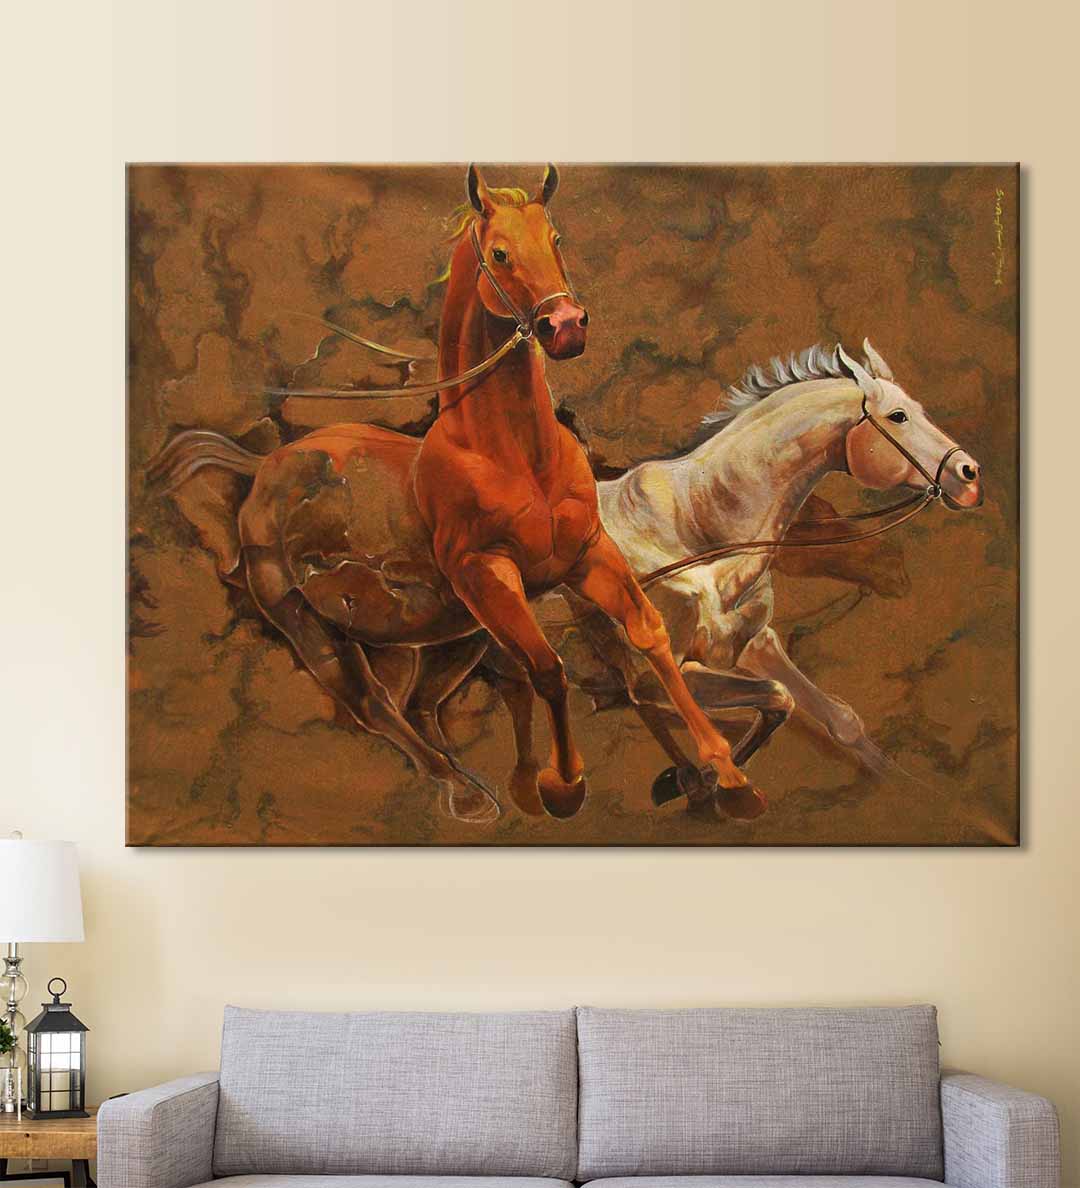 Tale of Two Horses - Wall Decor - 1